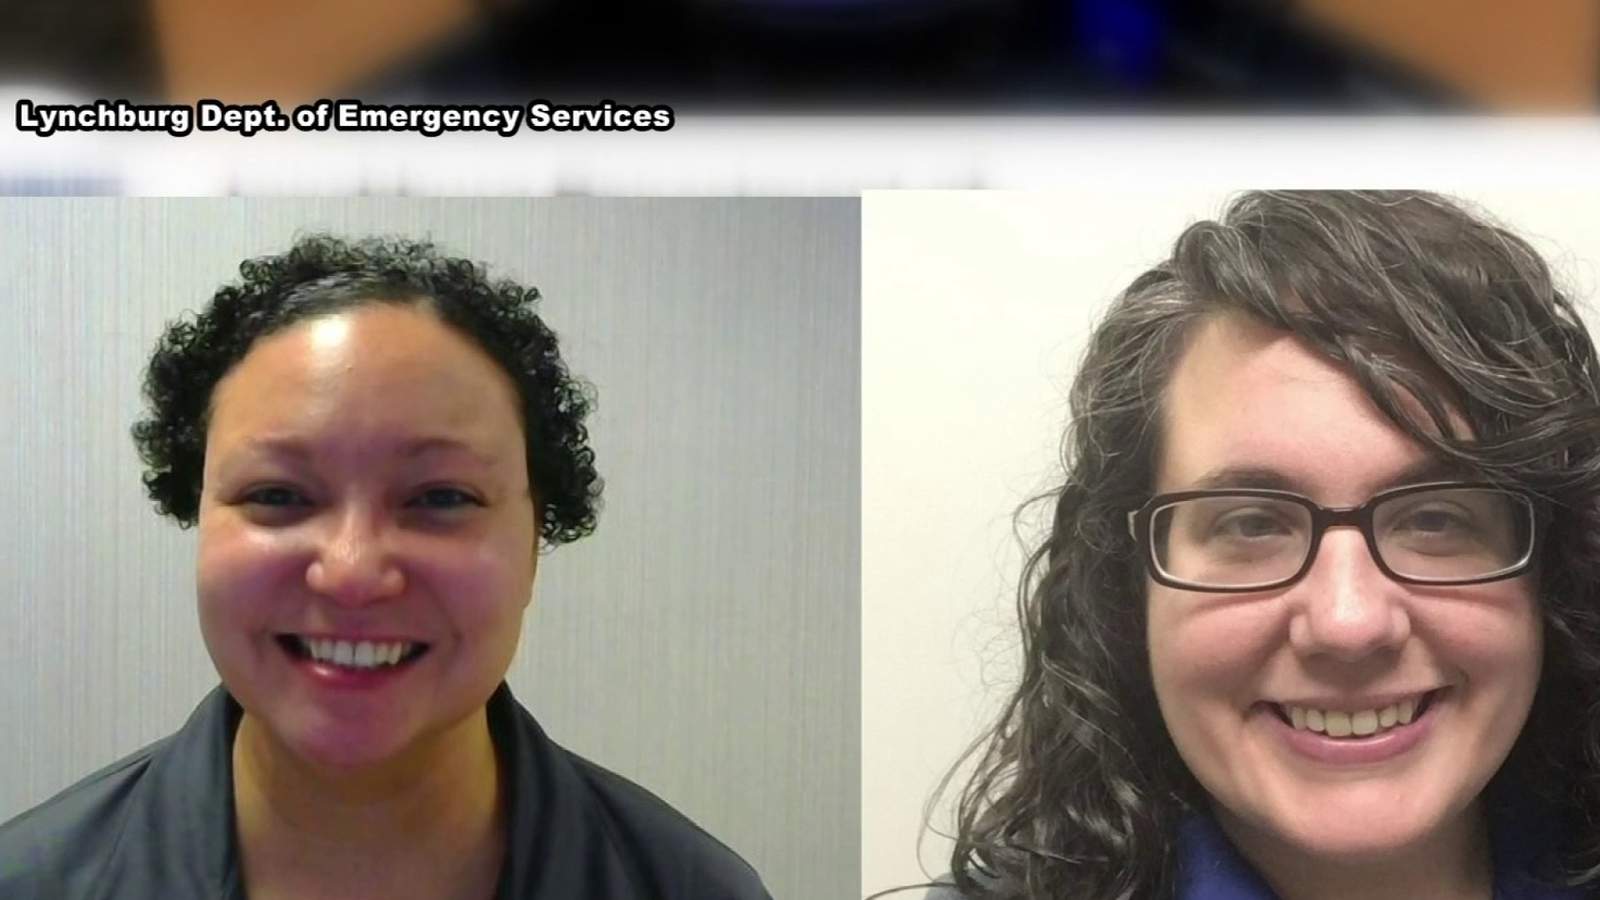 Lynchburg dispatchers who gave life-saving CPR instructions recognized online